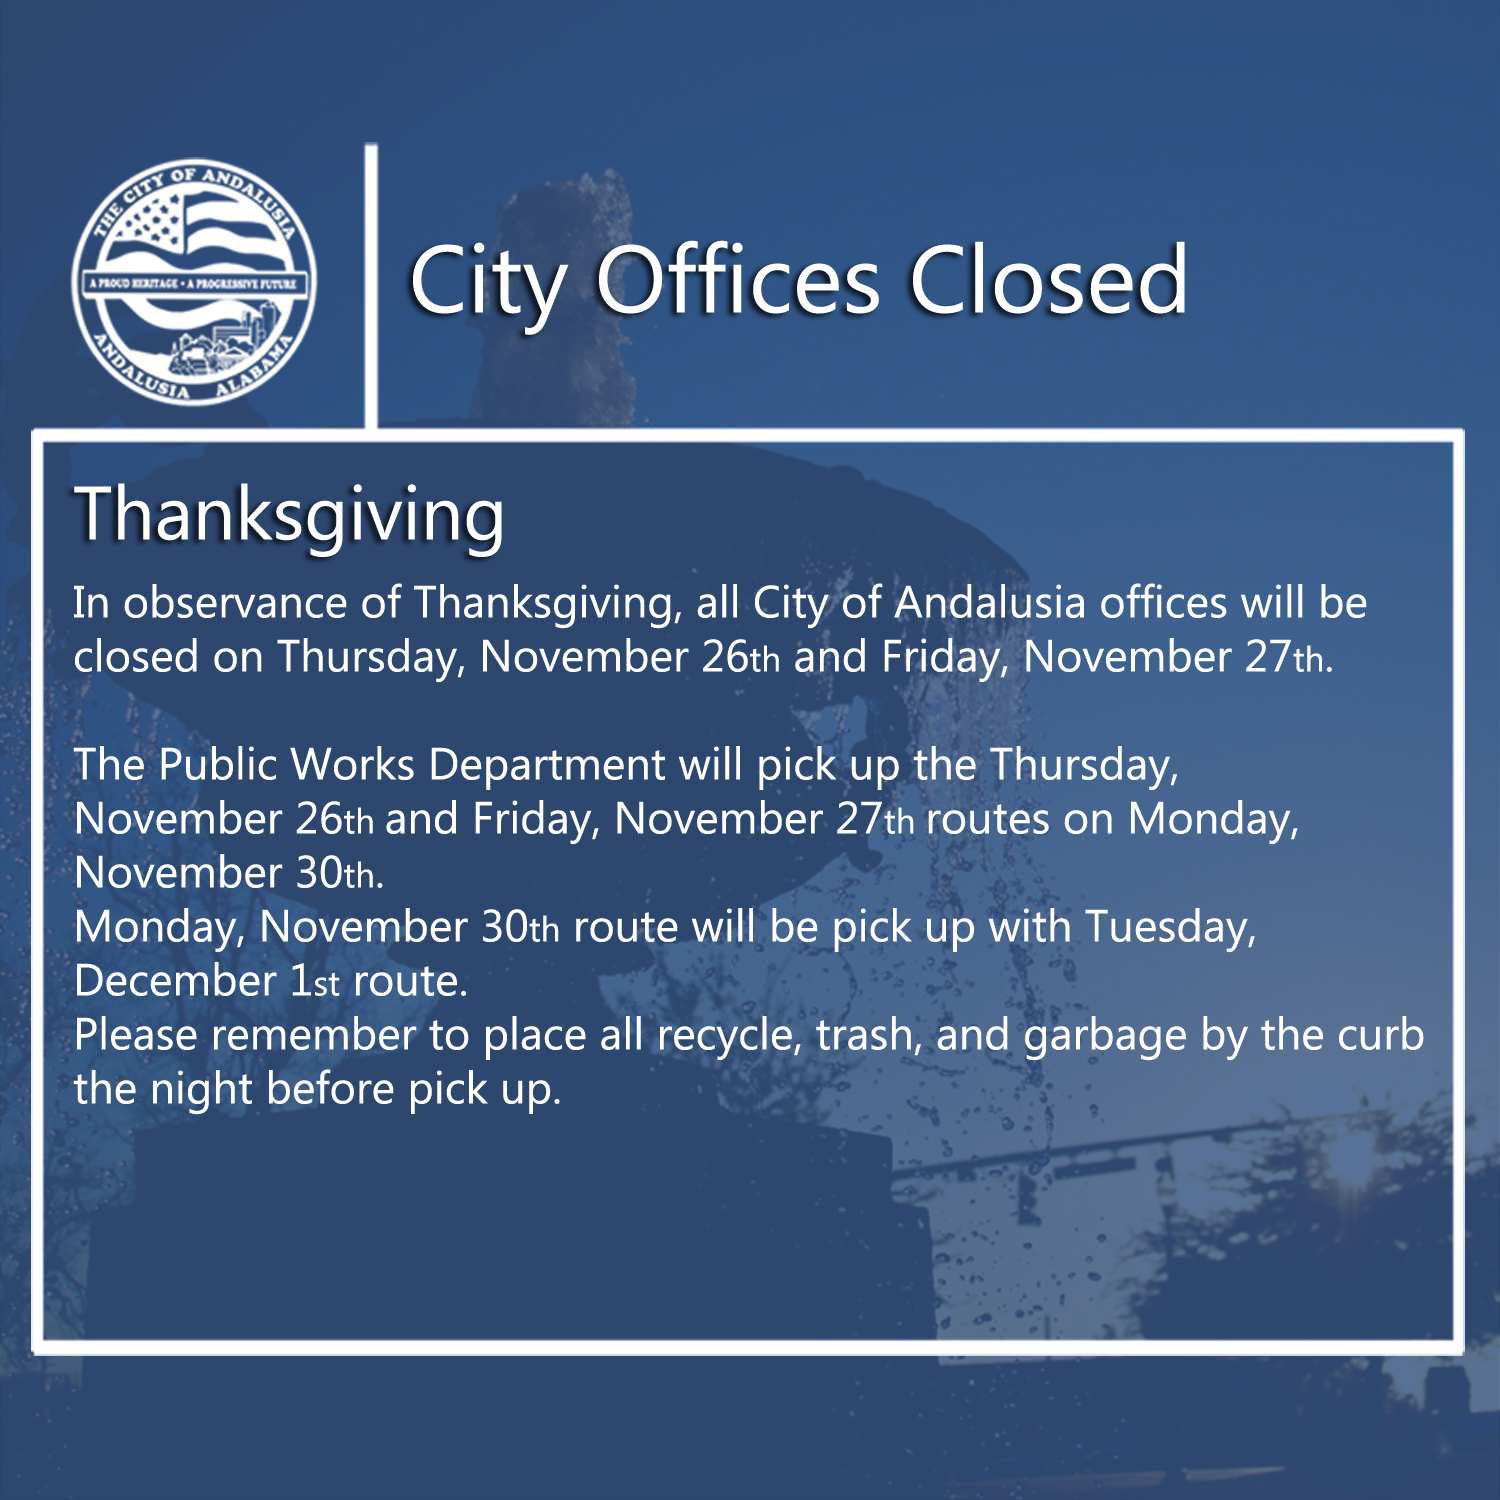 Facebook City Offices Closed Nov 26th 27th